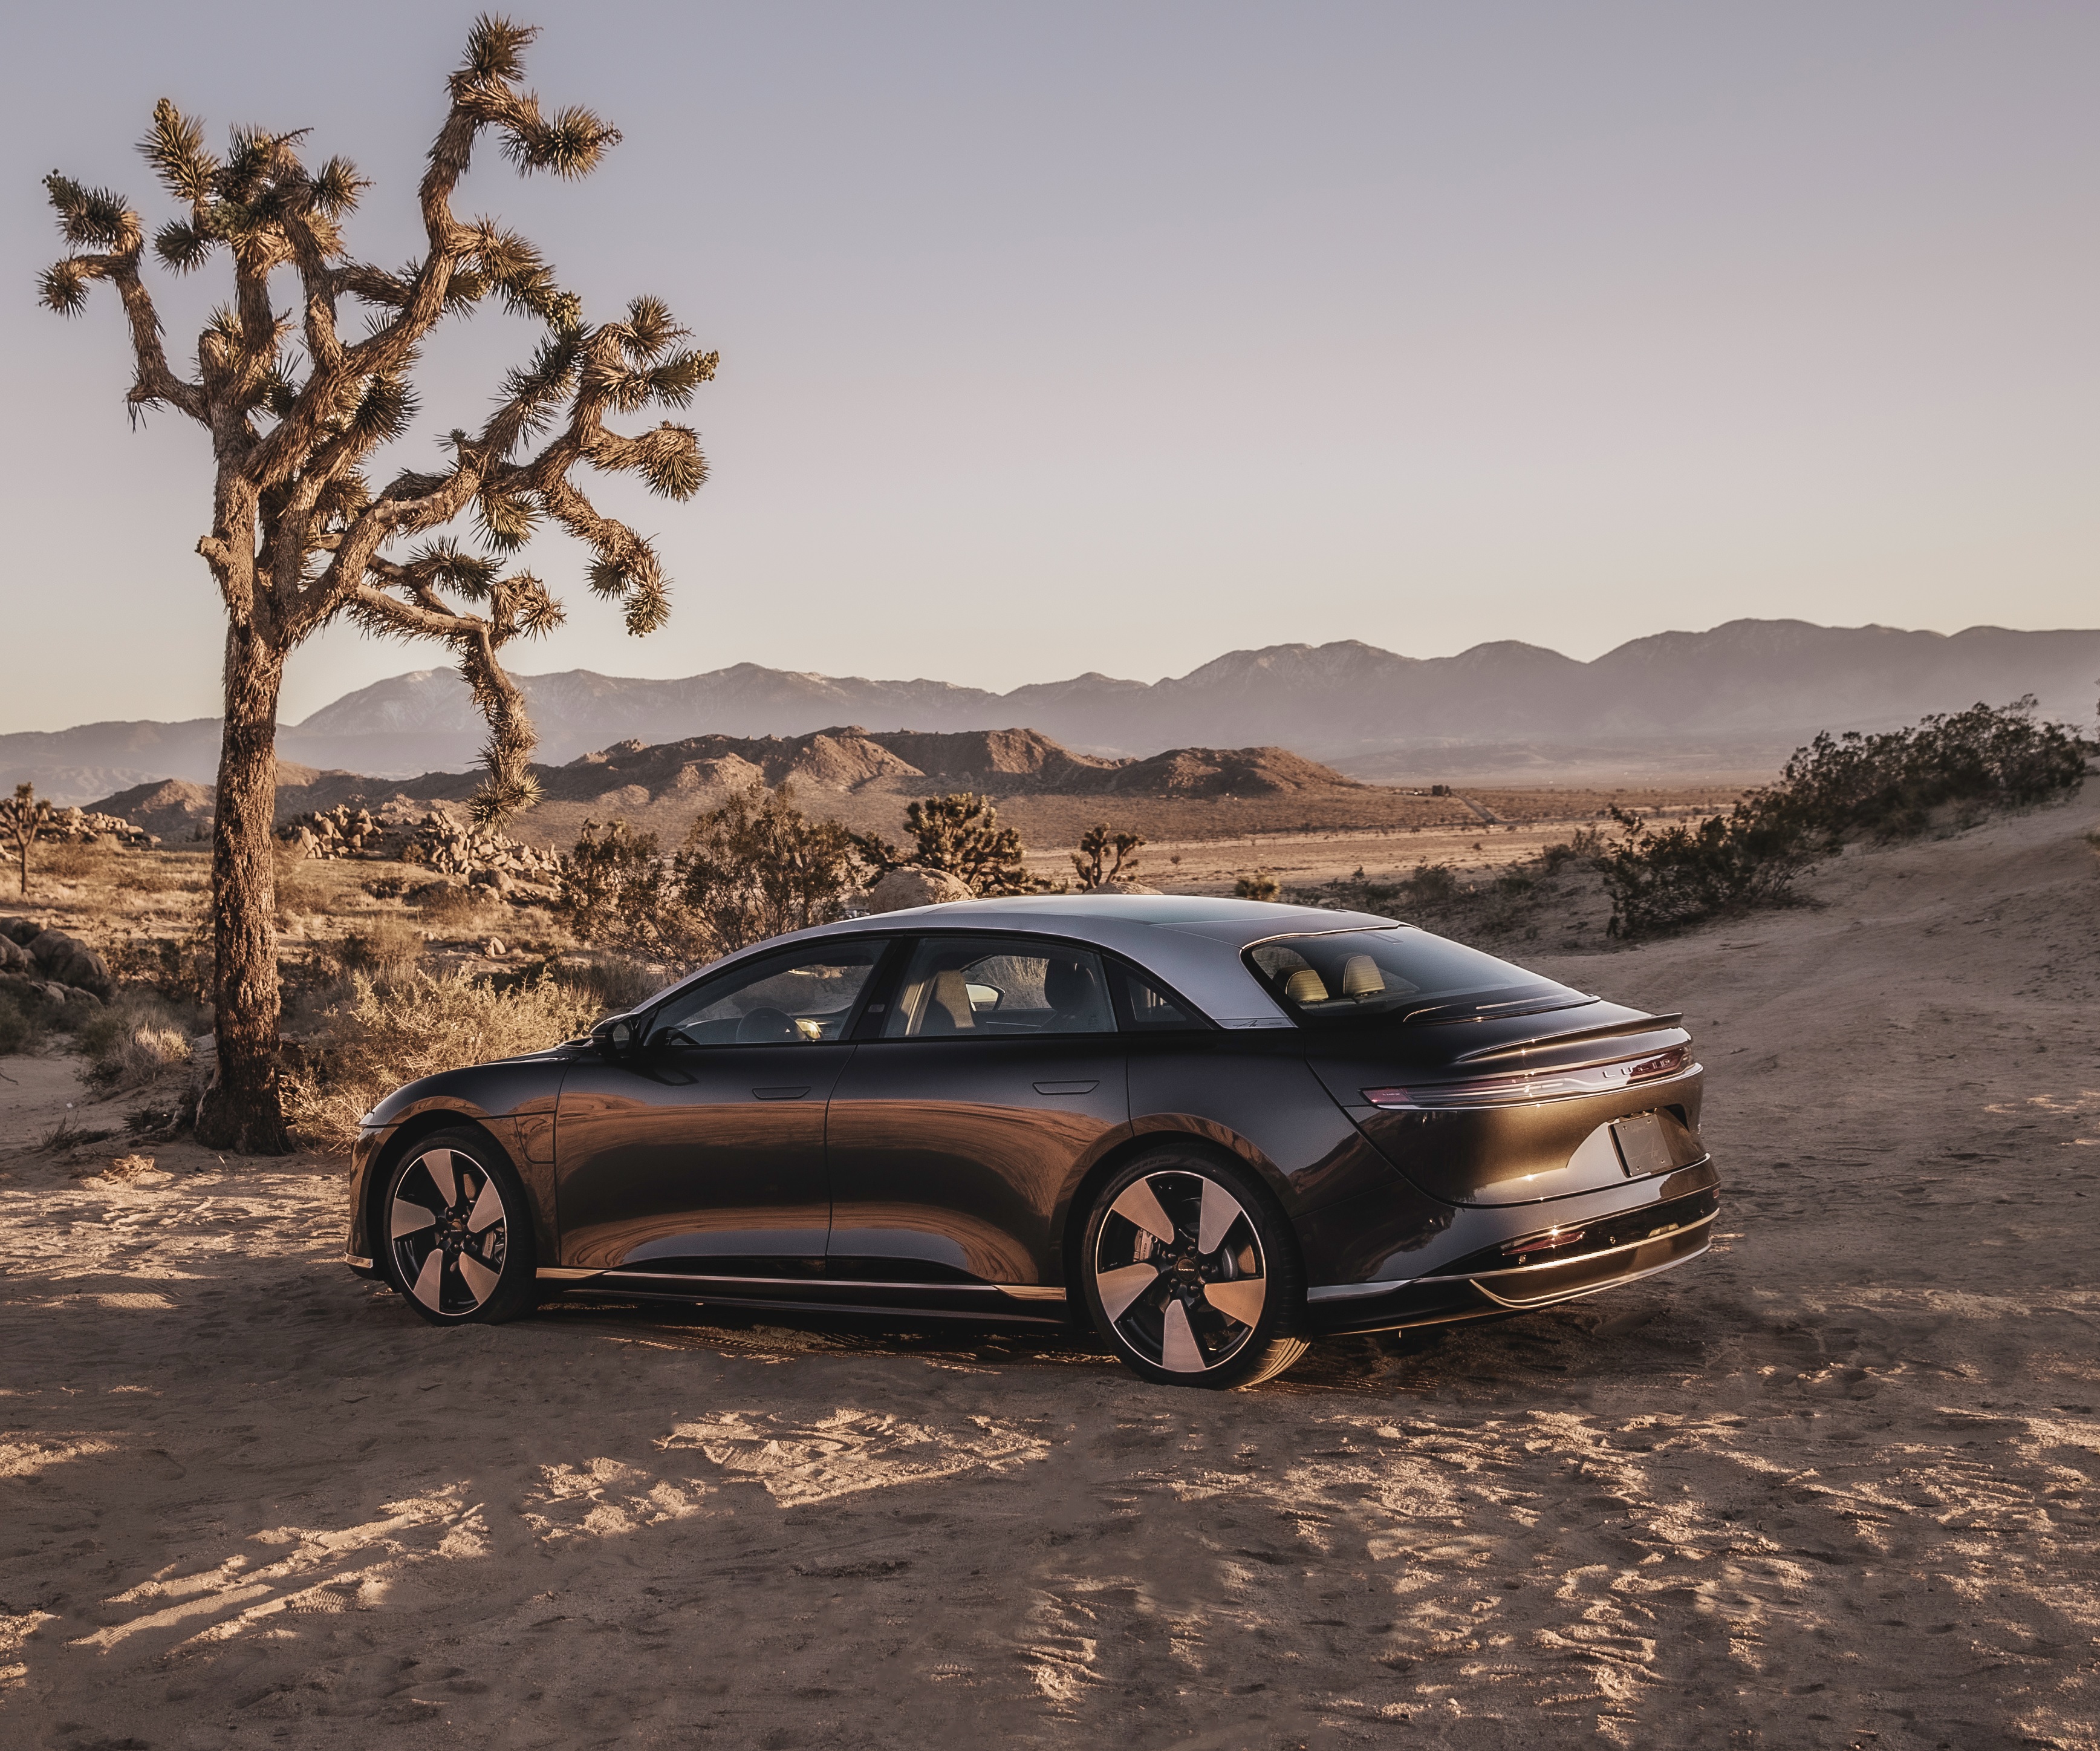 The rear 3/4 view of a gray 2022 Lucid Air Grand Touring Performance in the desert